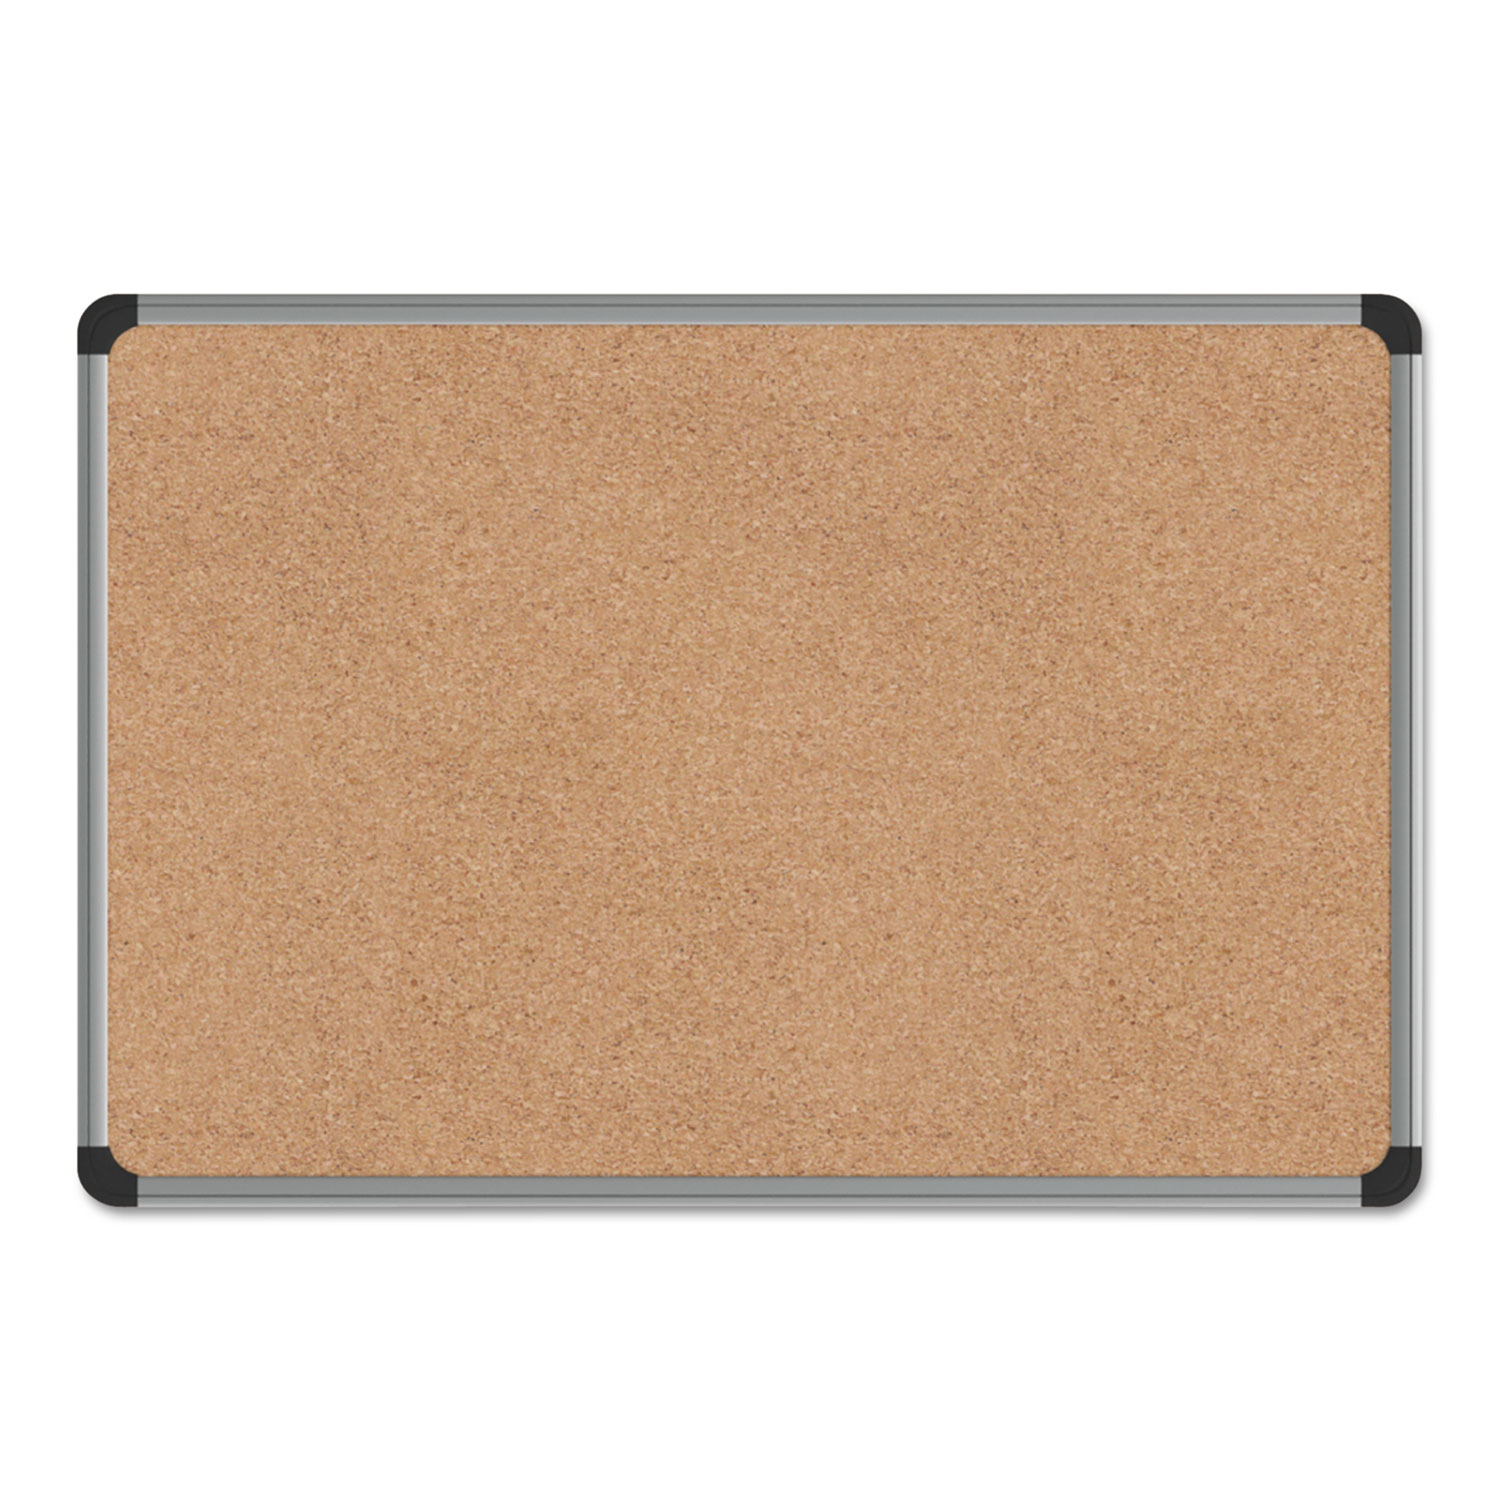  Universal UNV43712 Cork Board with Aluminum Frame, 24 x 18, Natural, Silver Frame (UNV43712) 